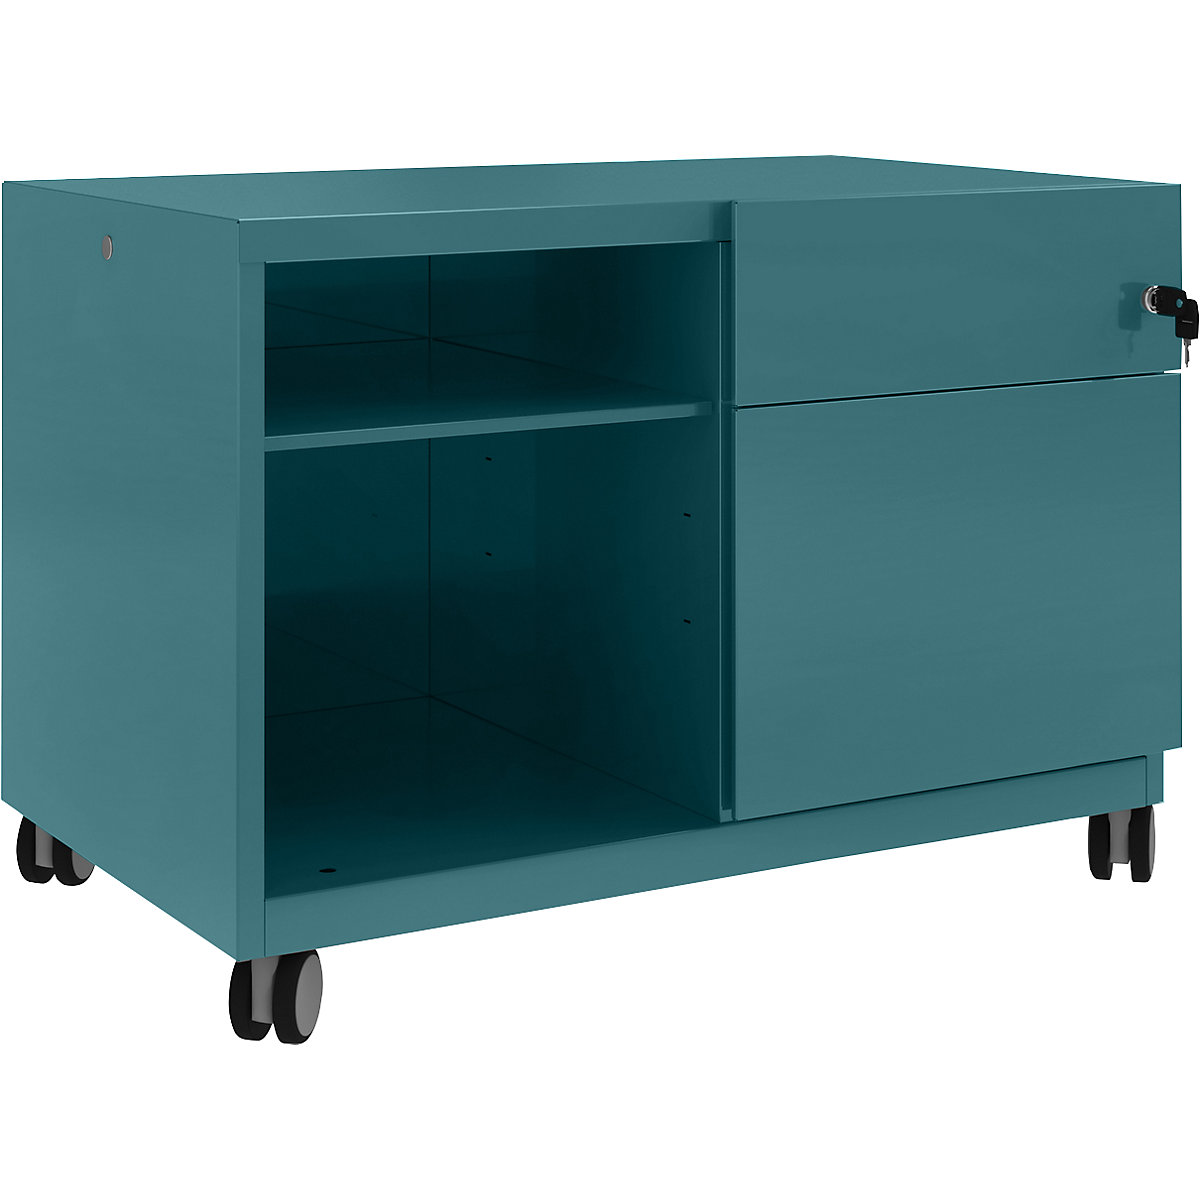 Note™ CADDY, HxBxT 563 x 800 x 490 mm – BISLEY, 1 universal drawer and suspension file drawer on the right, doulton-16